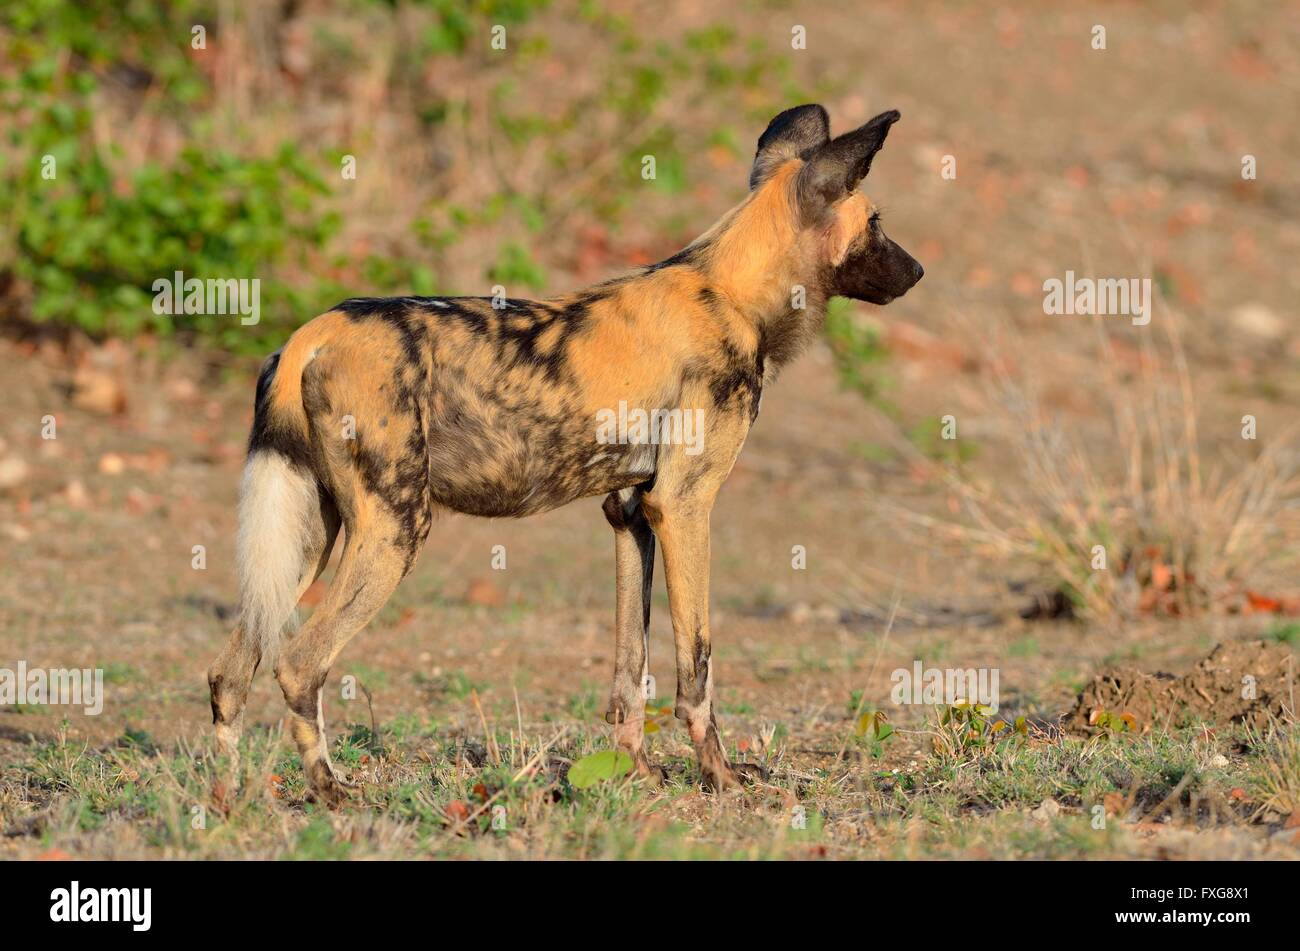 African Wild Dog, African Hunting Dog or African Painted Dog (Lycaon pictus), alert, Kruger National Park, South Africa Stock Photo